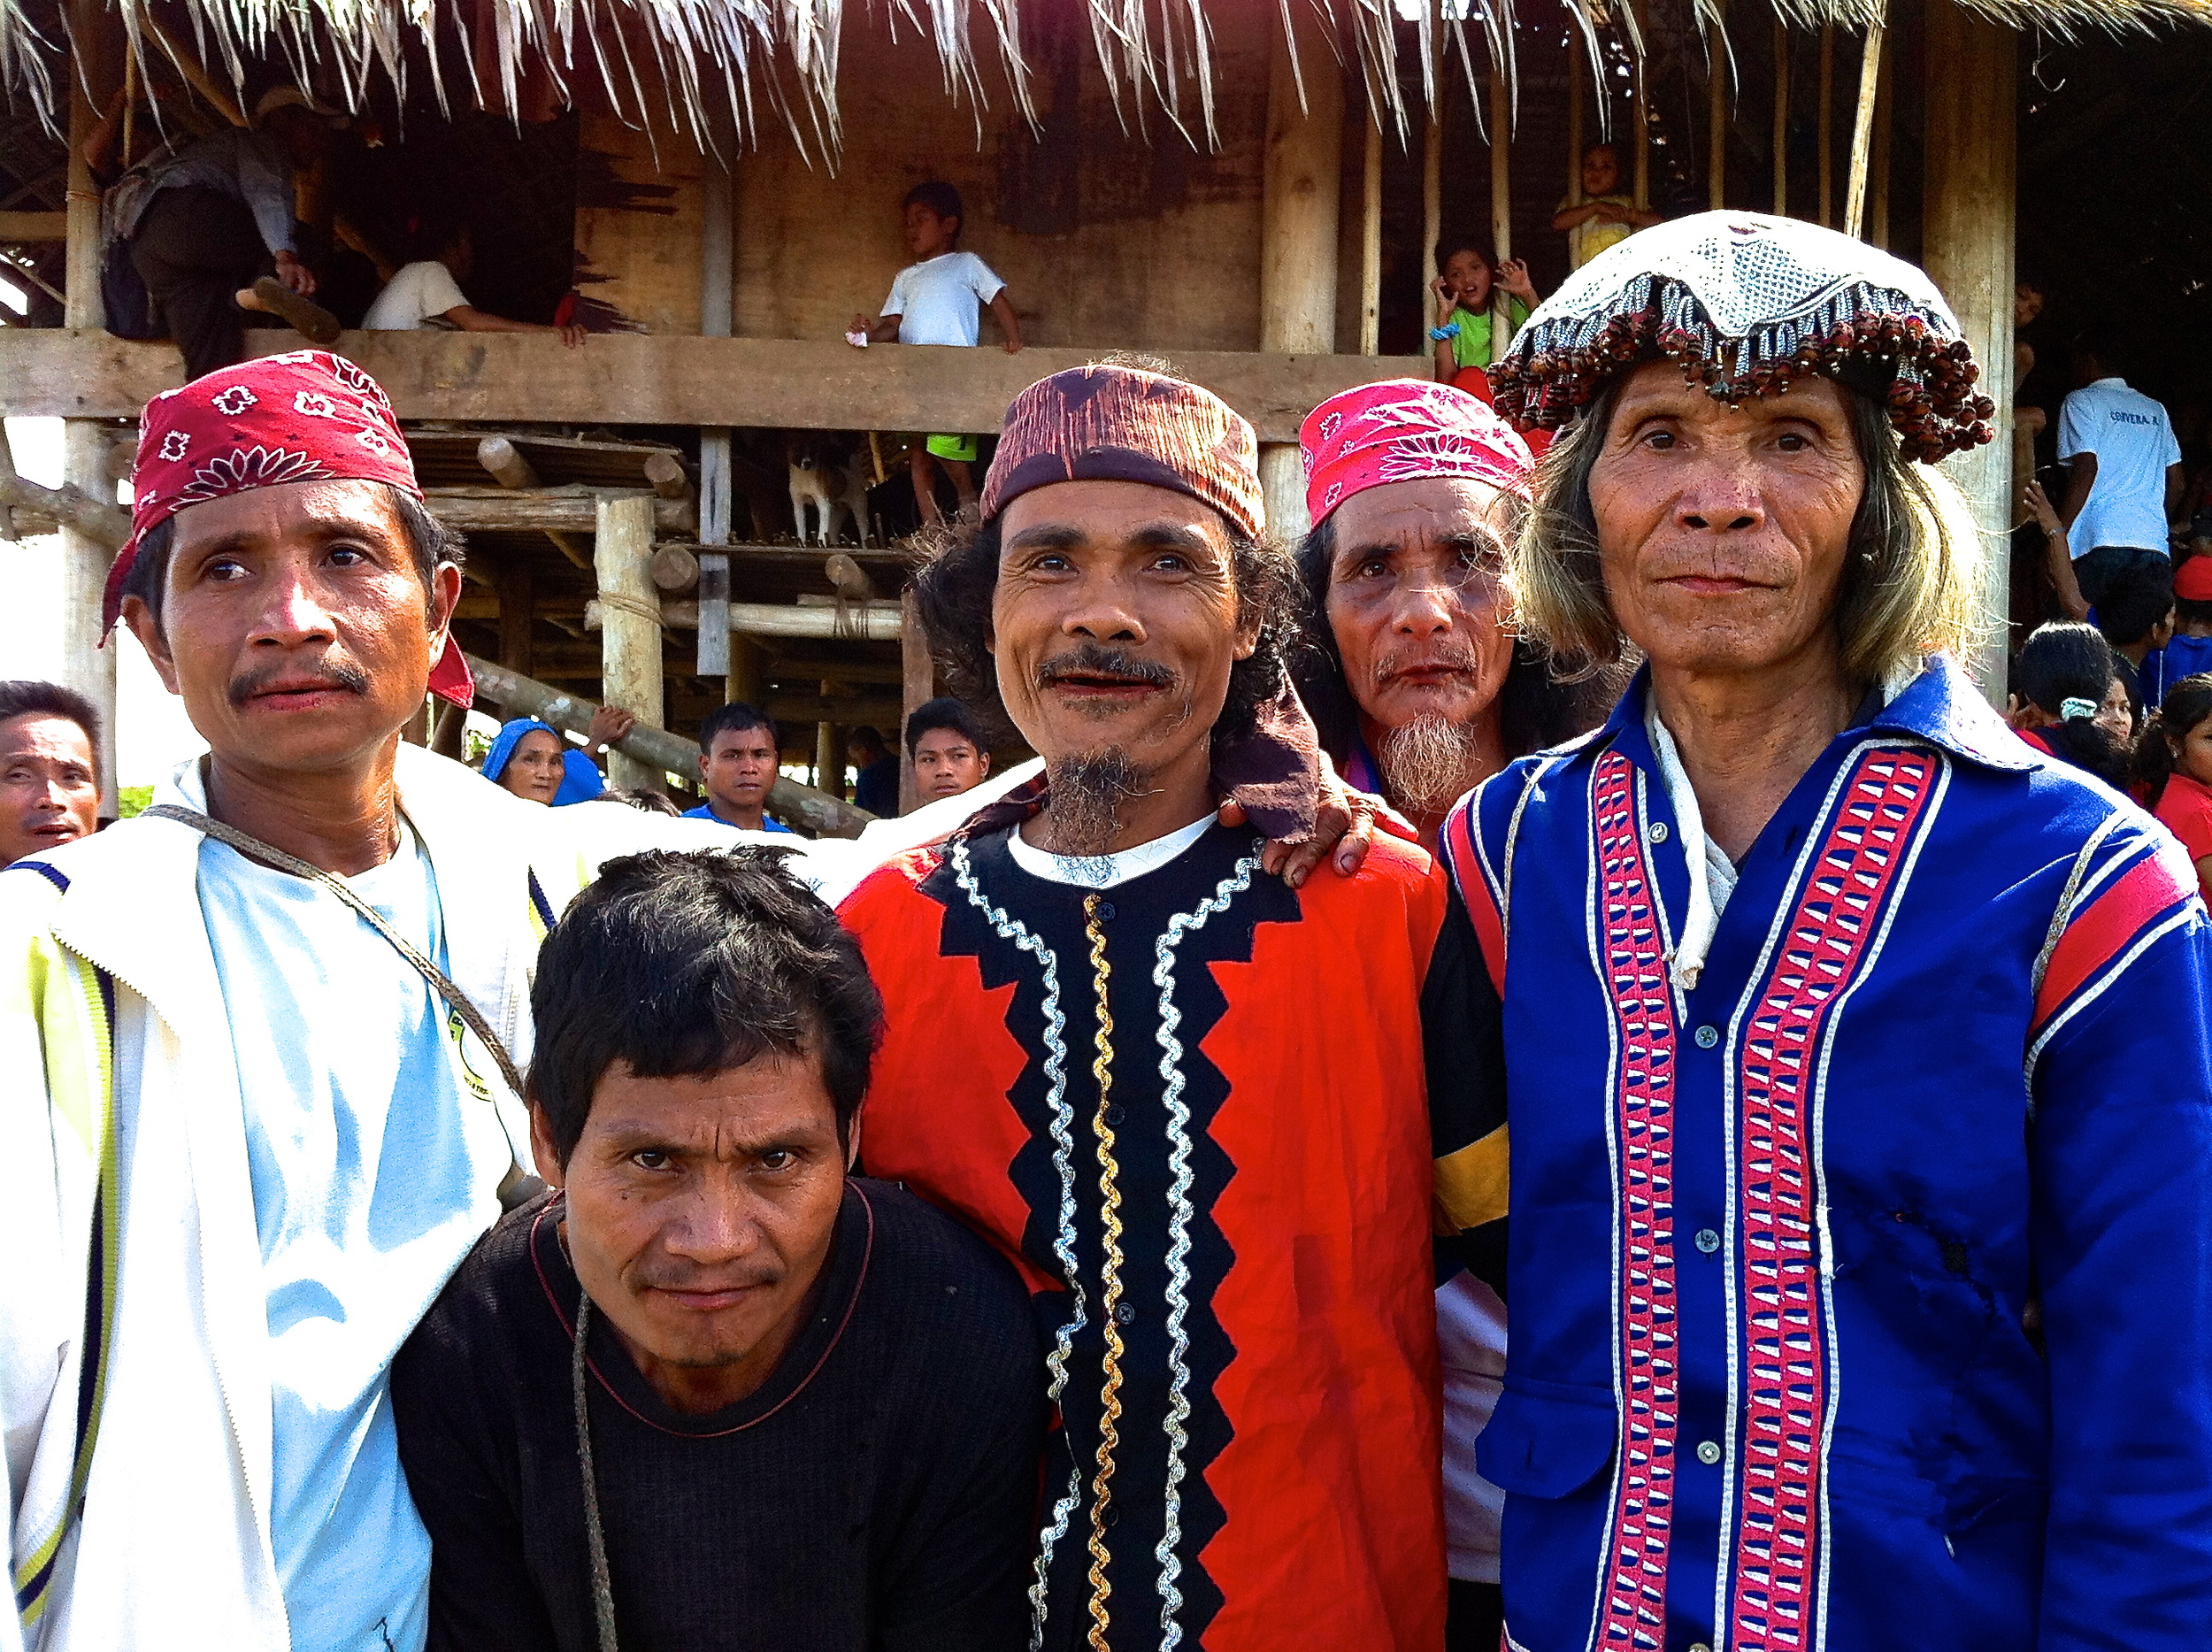 The tribal chiefs ask us to build them schools to protect and educate their children